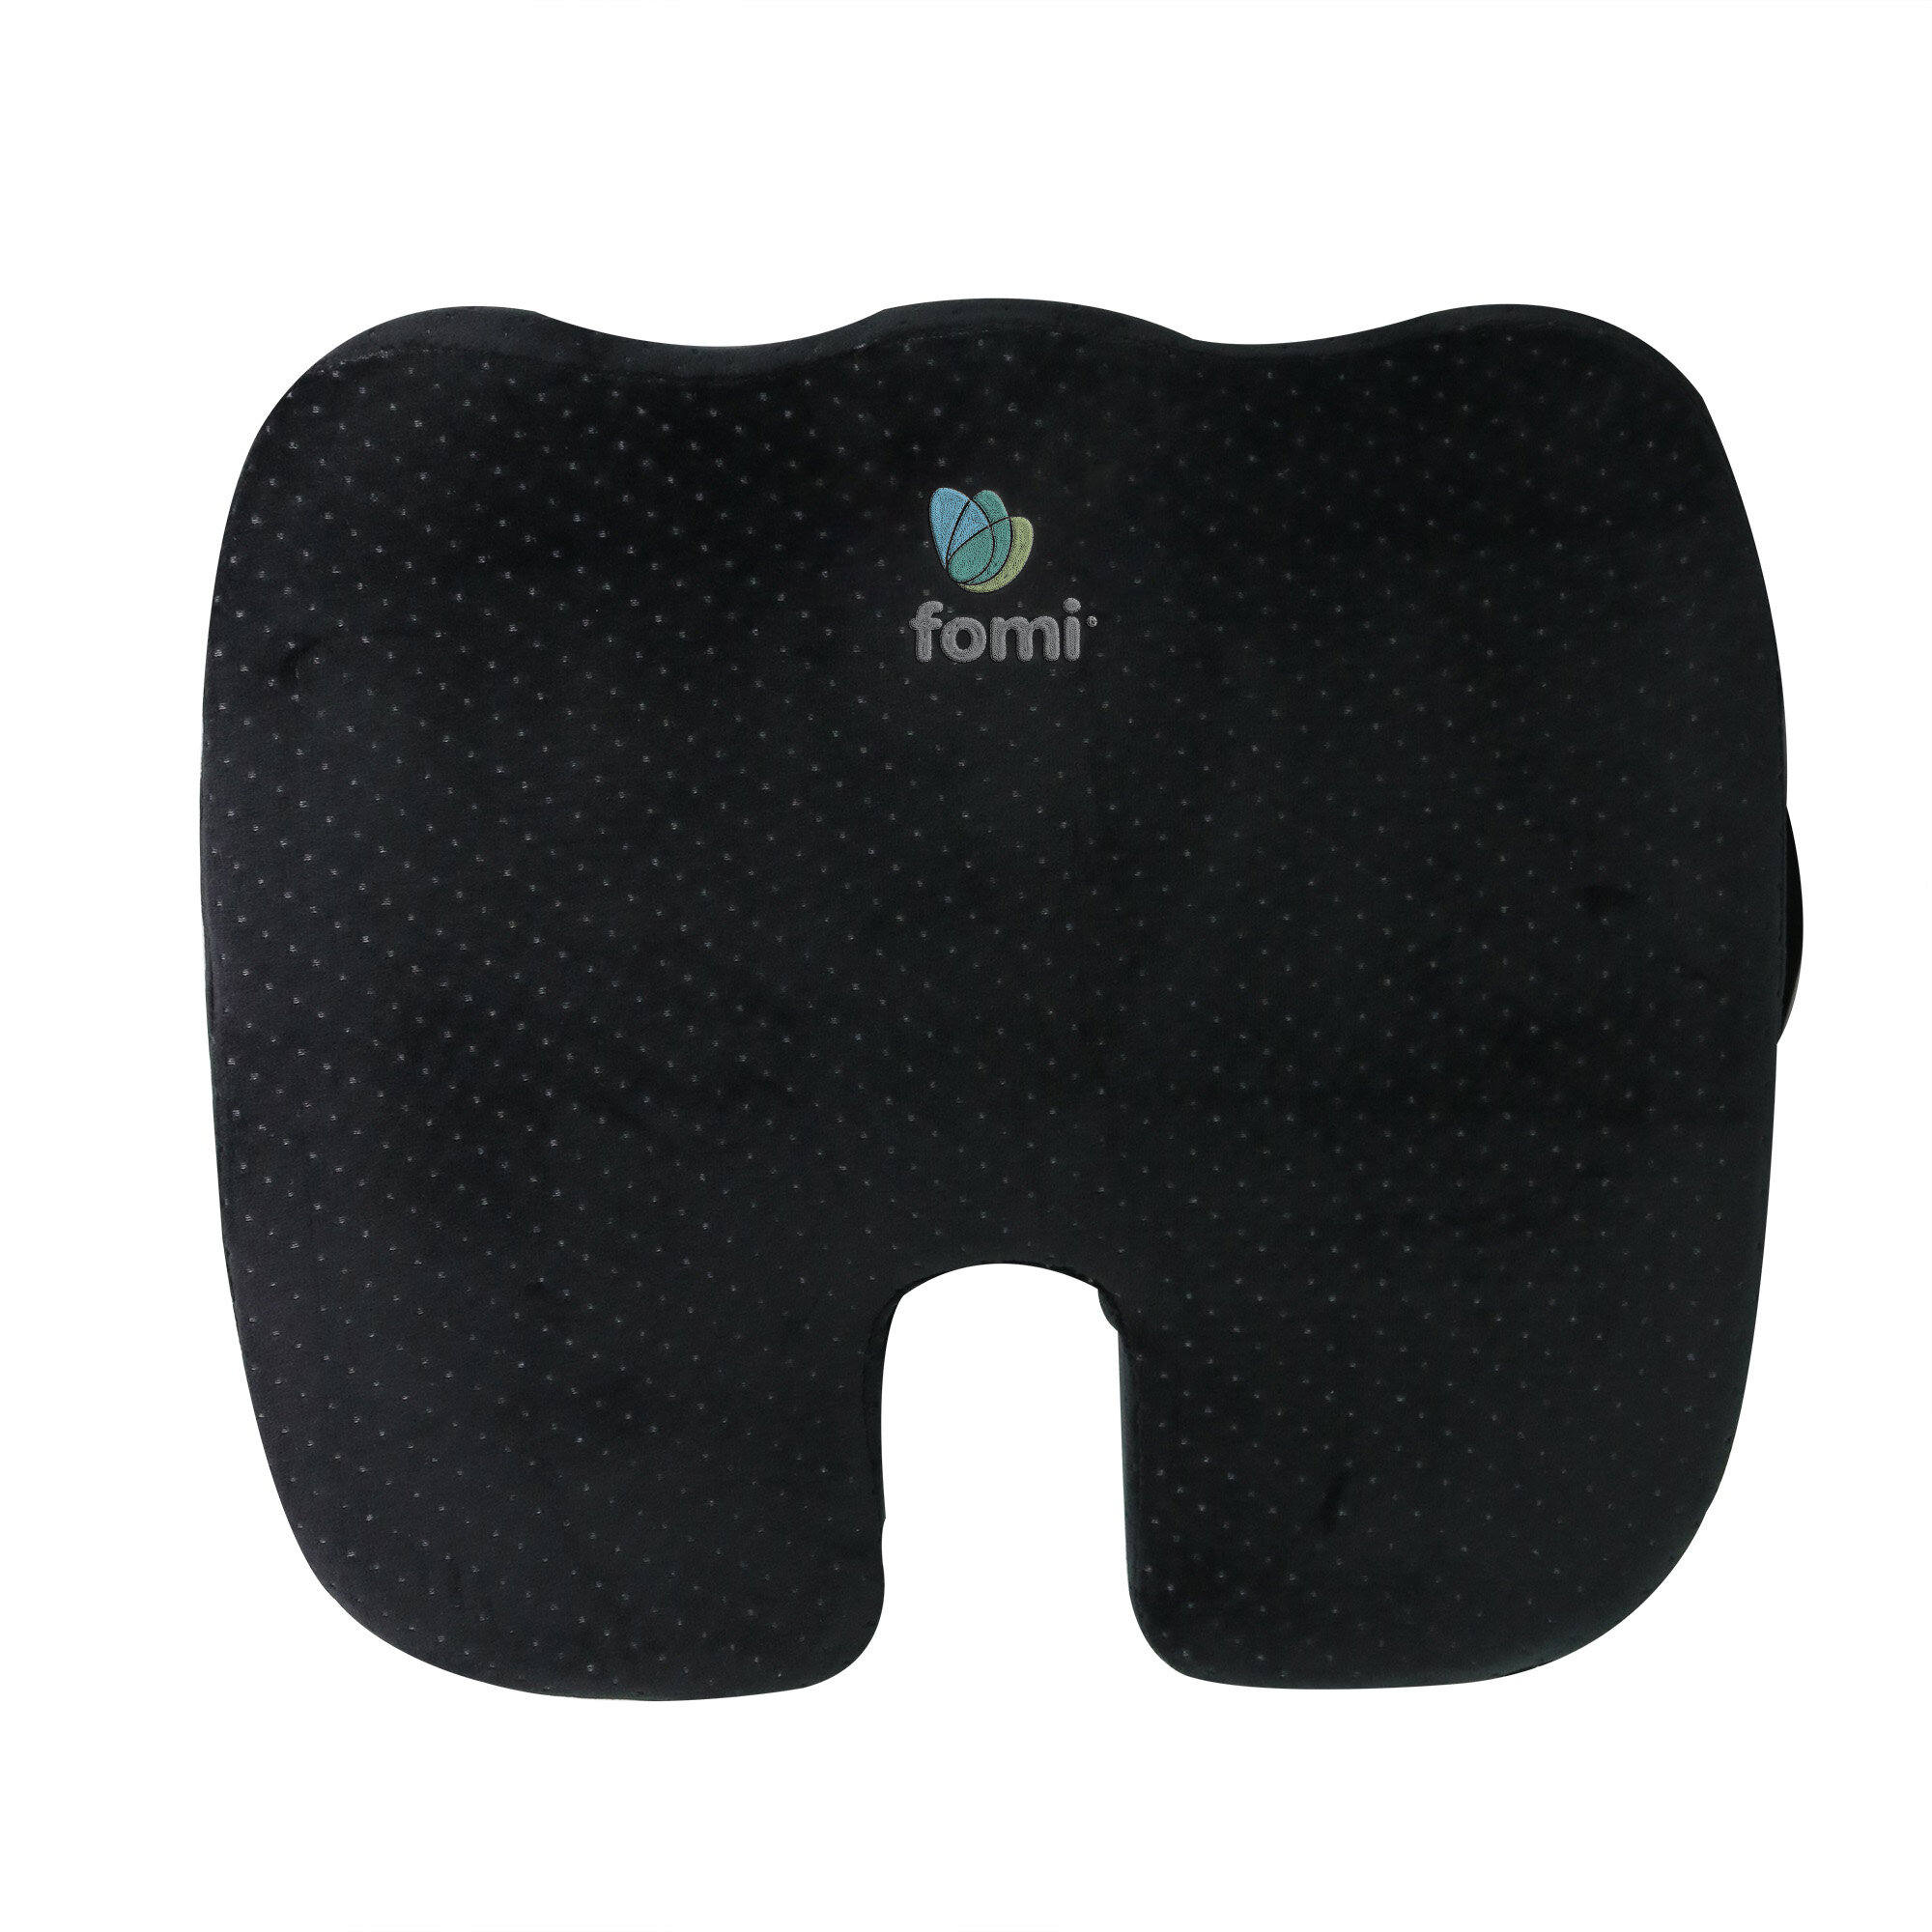 Home Upper Lower Backrest Enhances Posture Thick Thoracic Memory Foam Pad for Car Office FOMI Back Lumbar Support Pillow Wheelchair Sciatica Recliner Gaming Chair Tailbone Pain Relief 